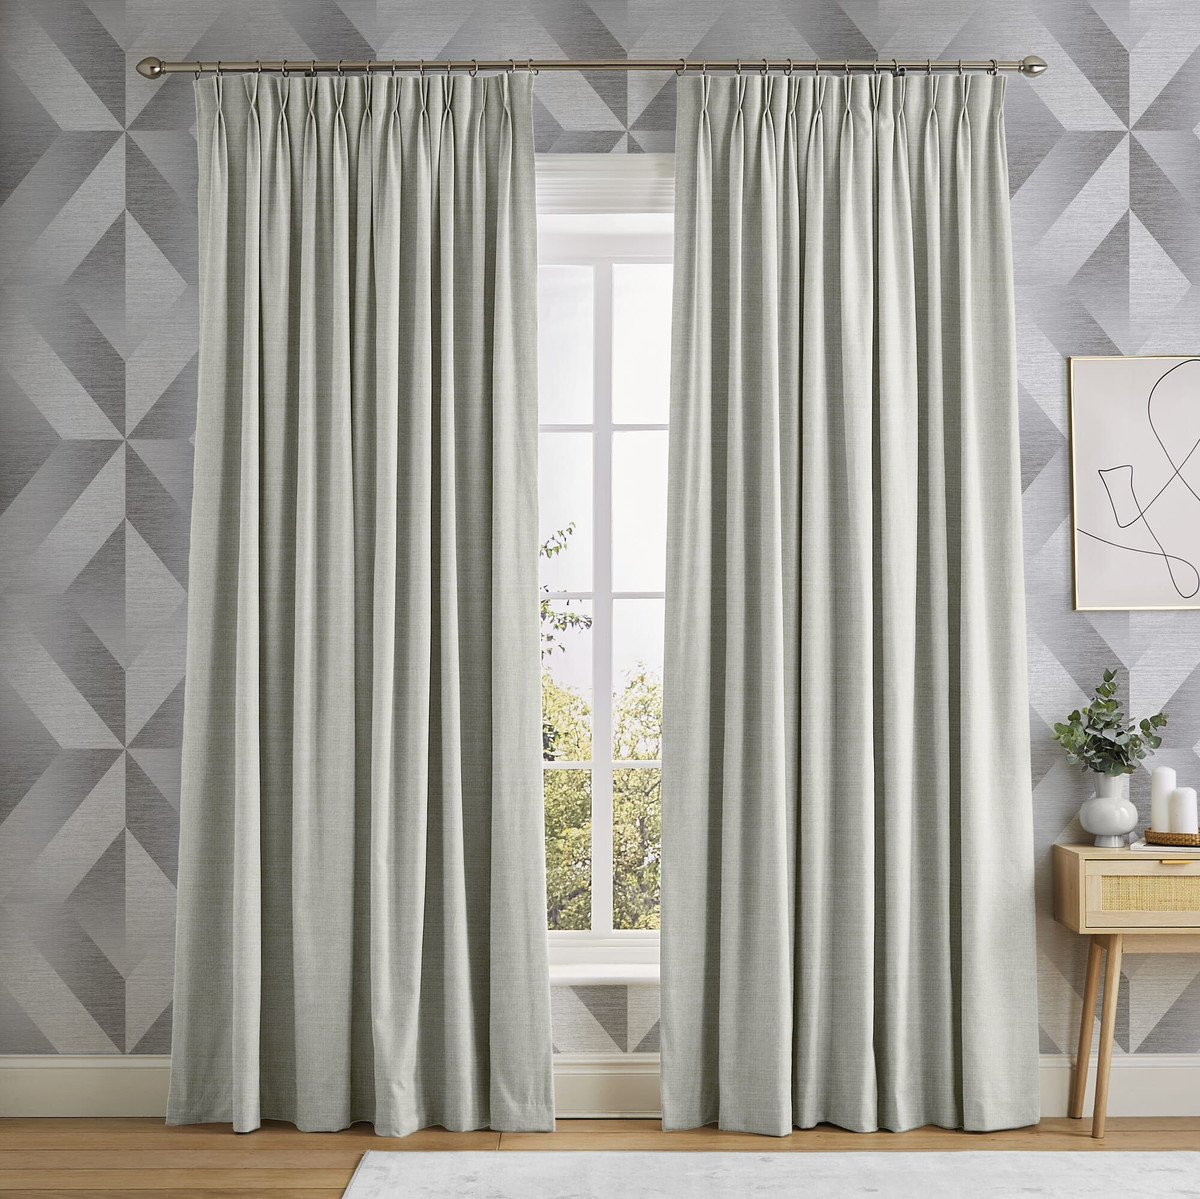 Wallace Chalk Curtains